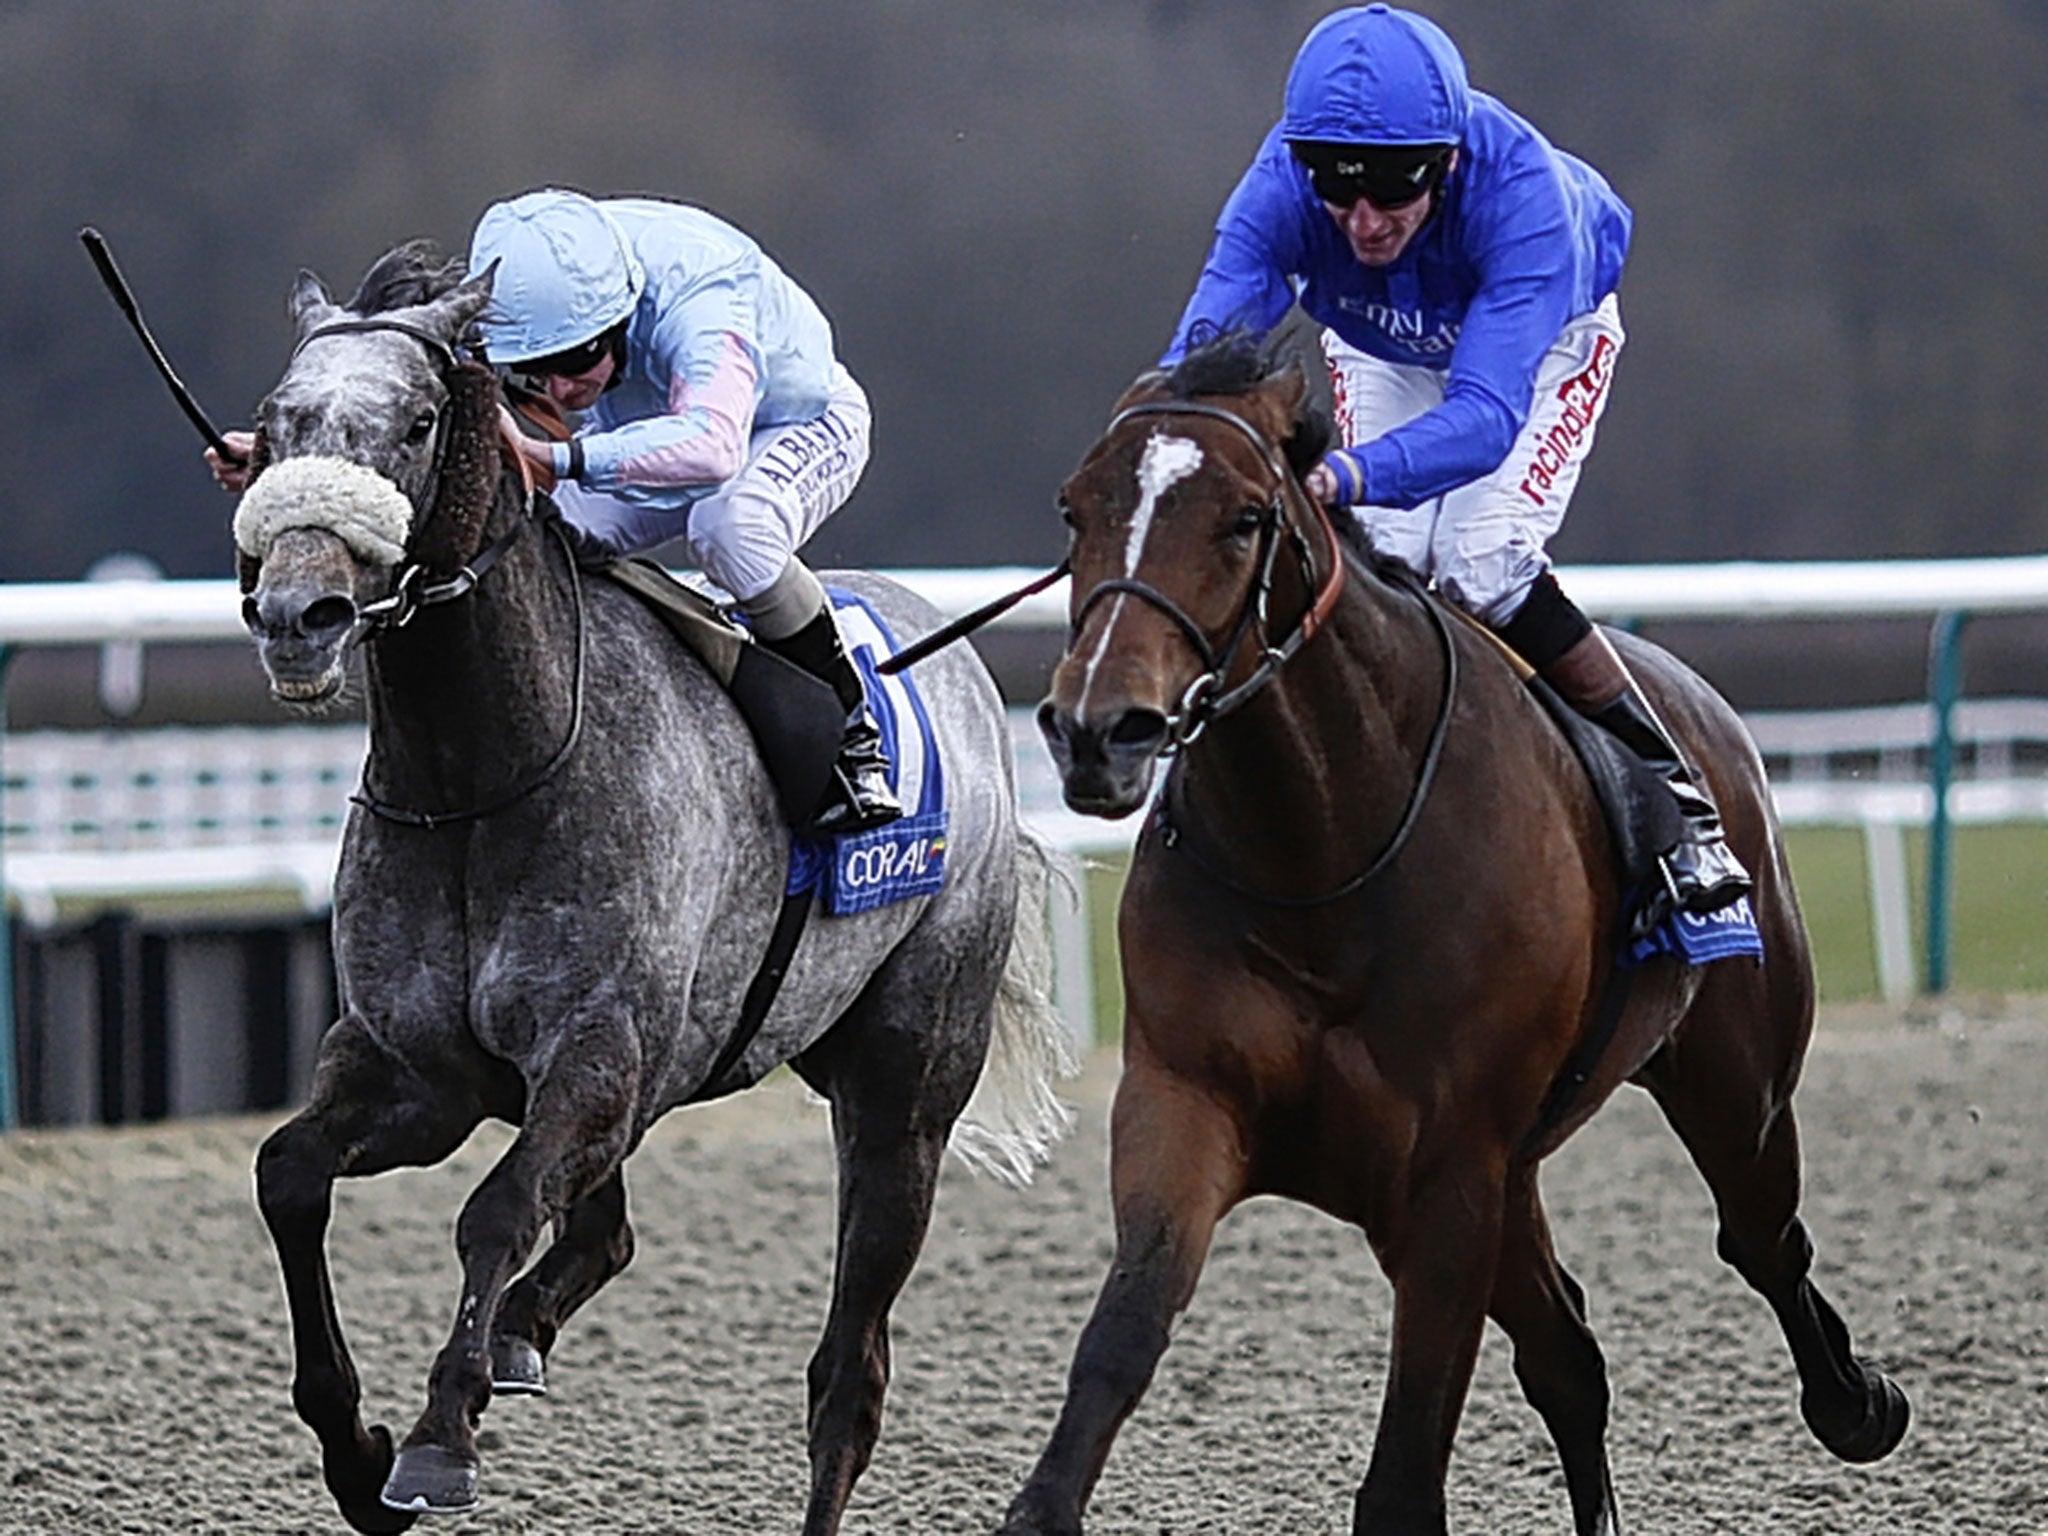 Tryster (right) carries Godolphin’s royal blue to victory in the Winter Derby at Lingfield last month